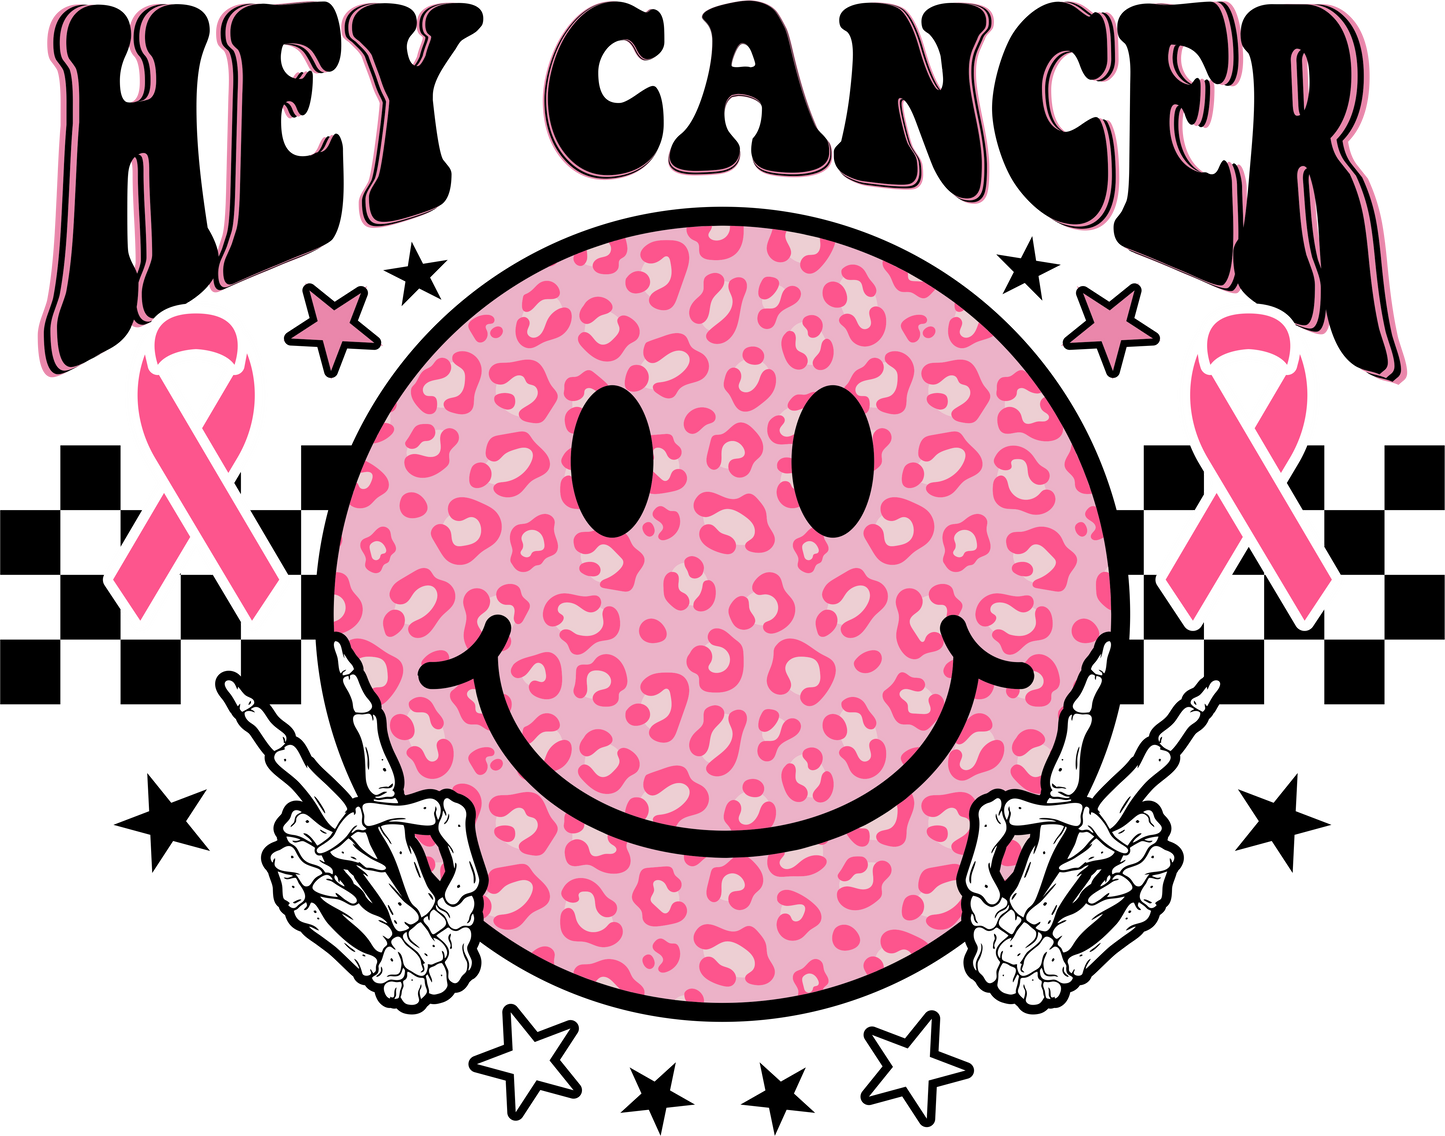 BREAST CANCER PRINT 16 - HEY CANCER PEACE OUT